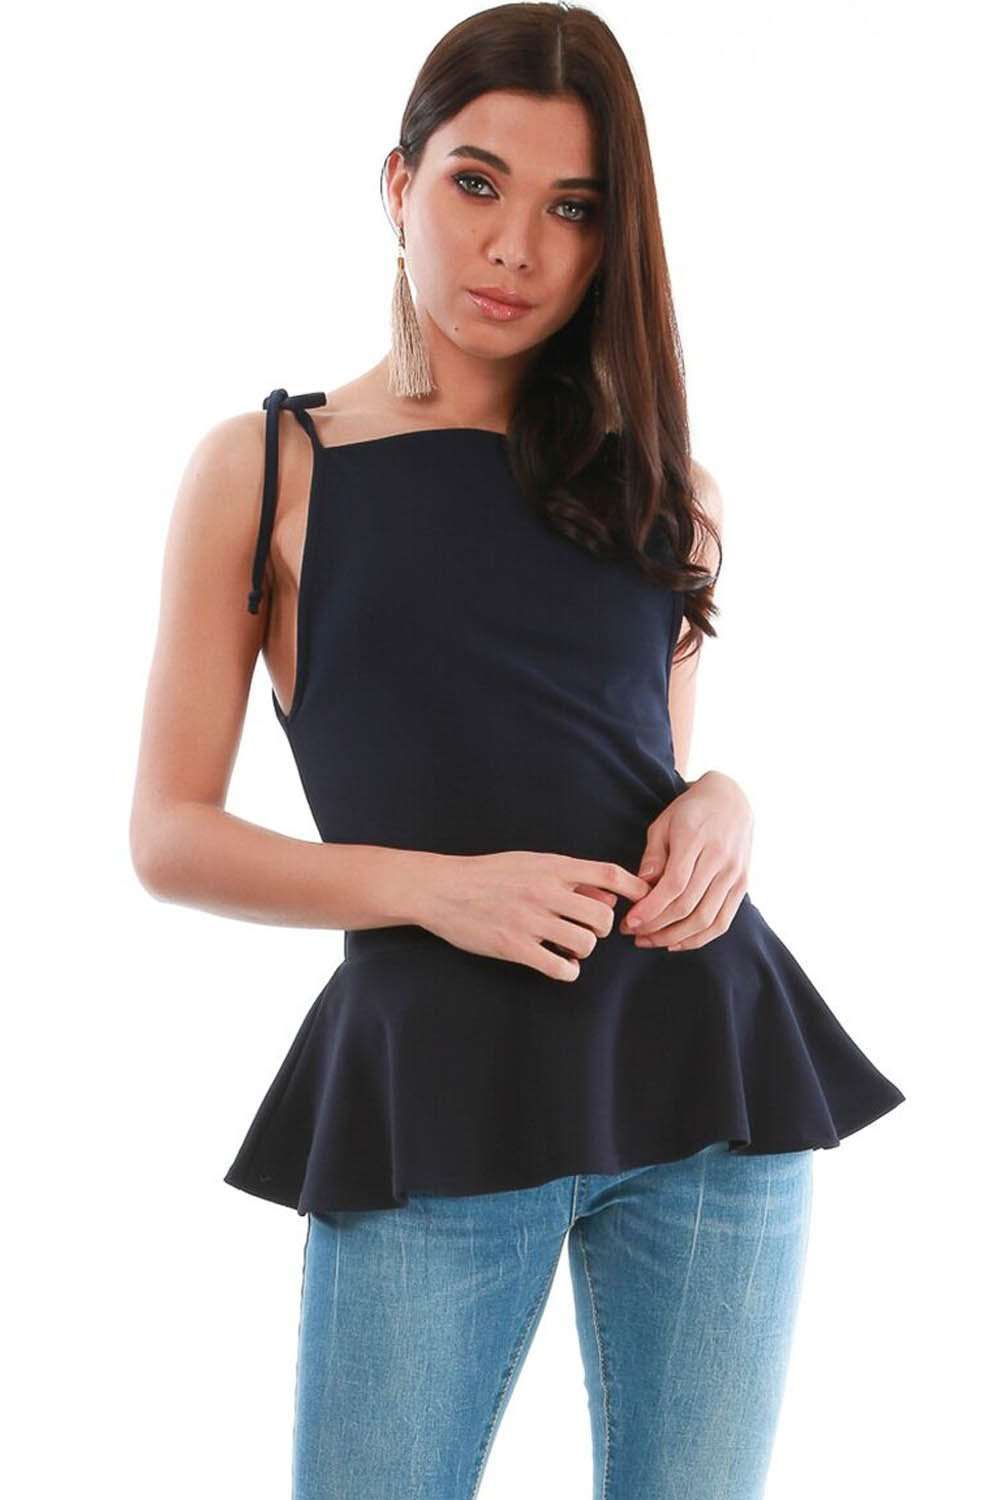 Strappy Coral Square Tie Neck Peplum Frill Top - bejealous-com